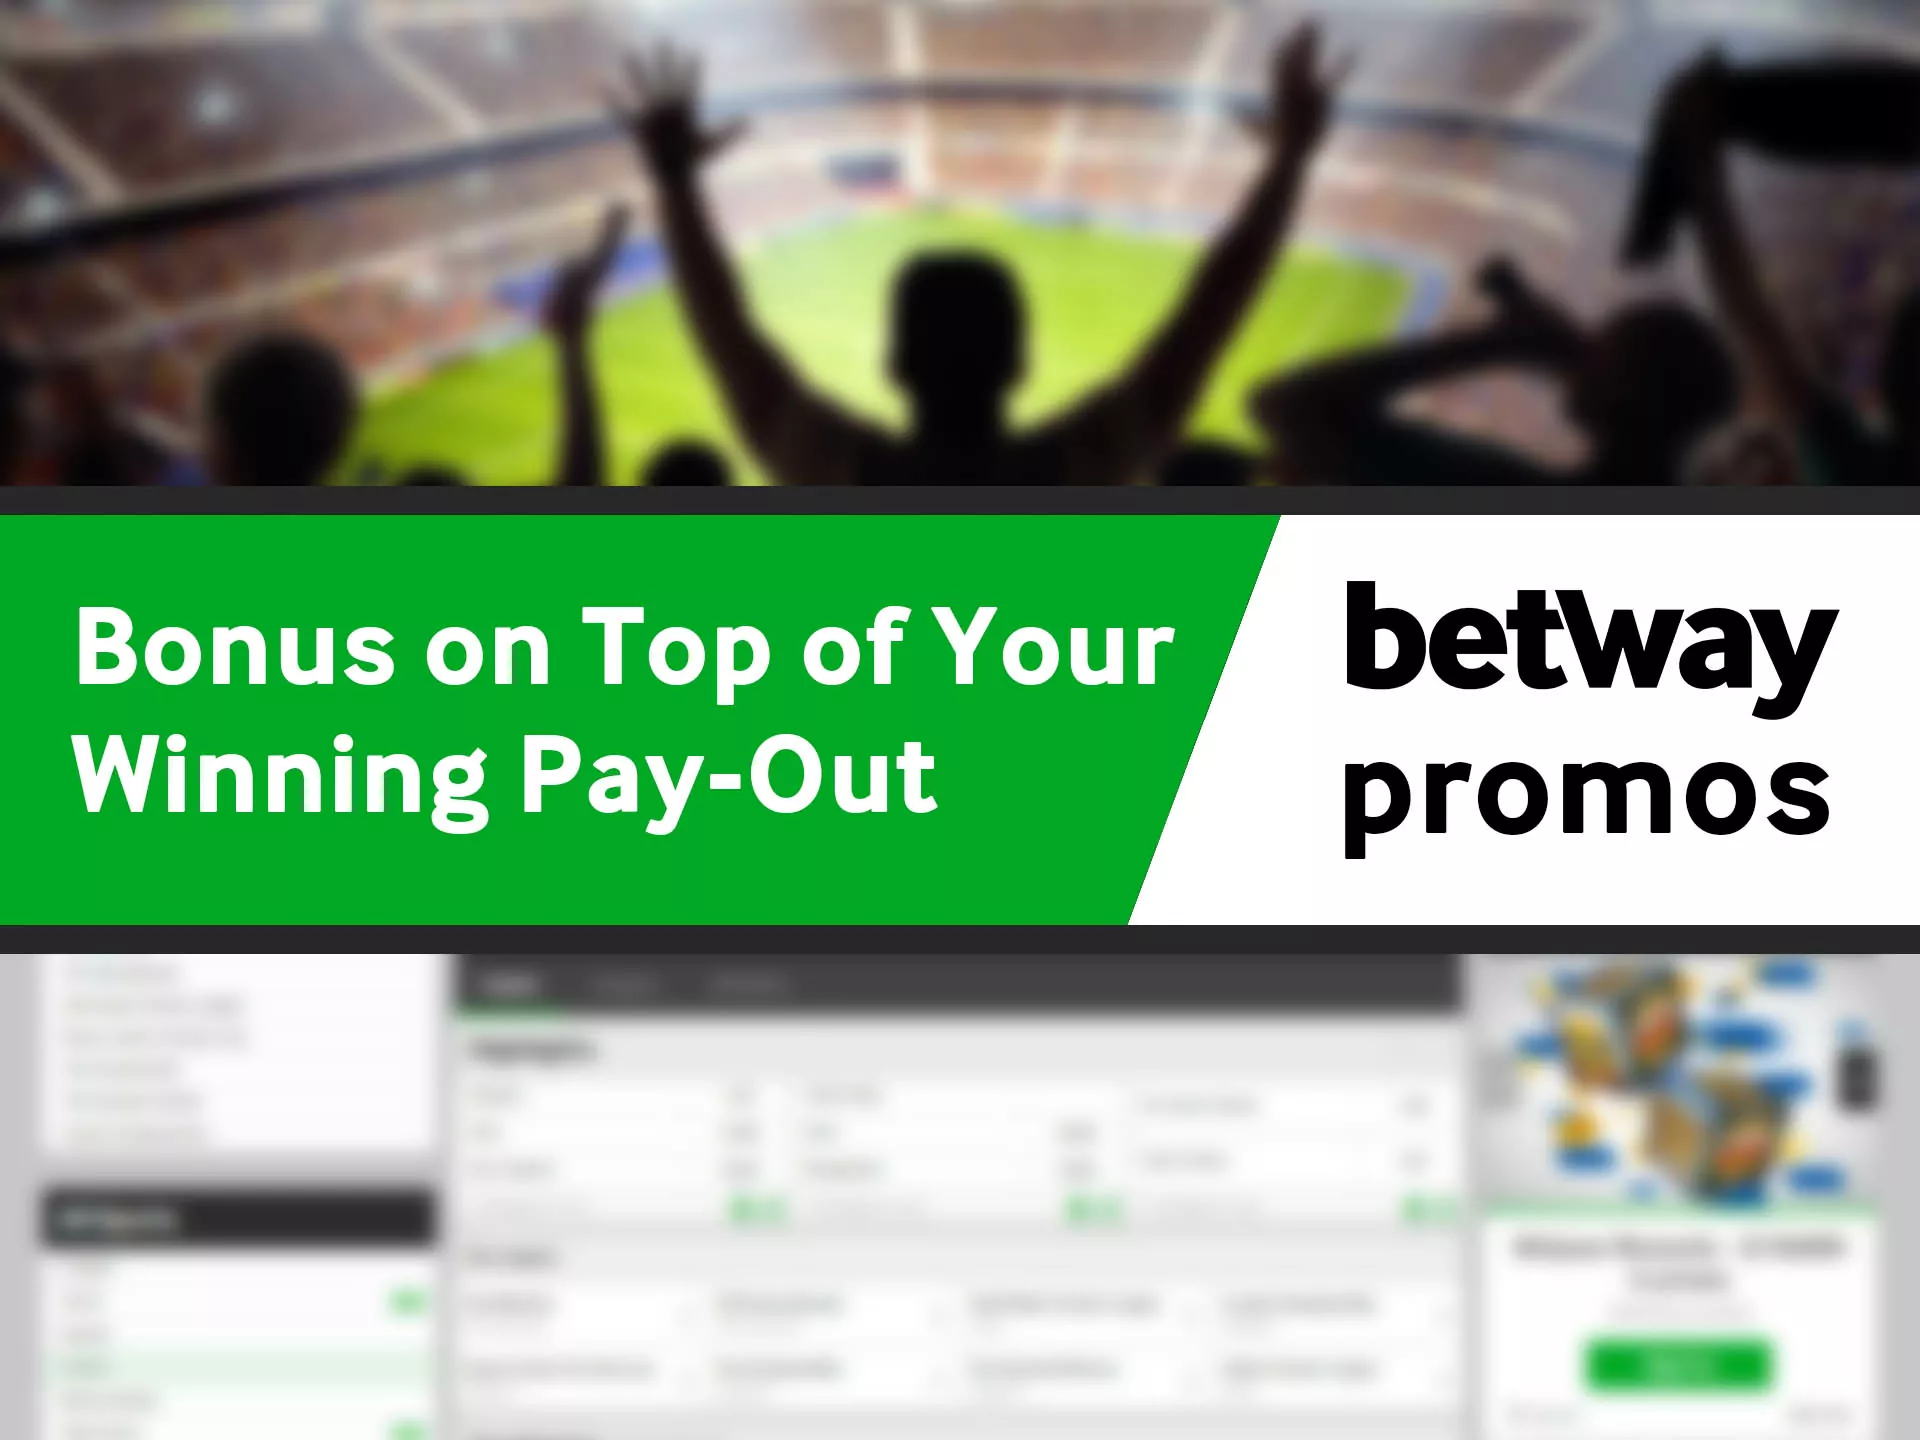 If your bet win you can get more money at Betway.